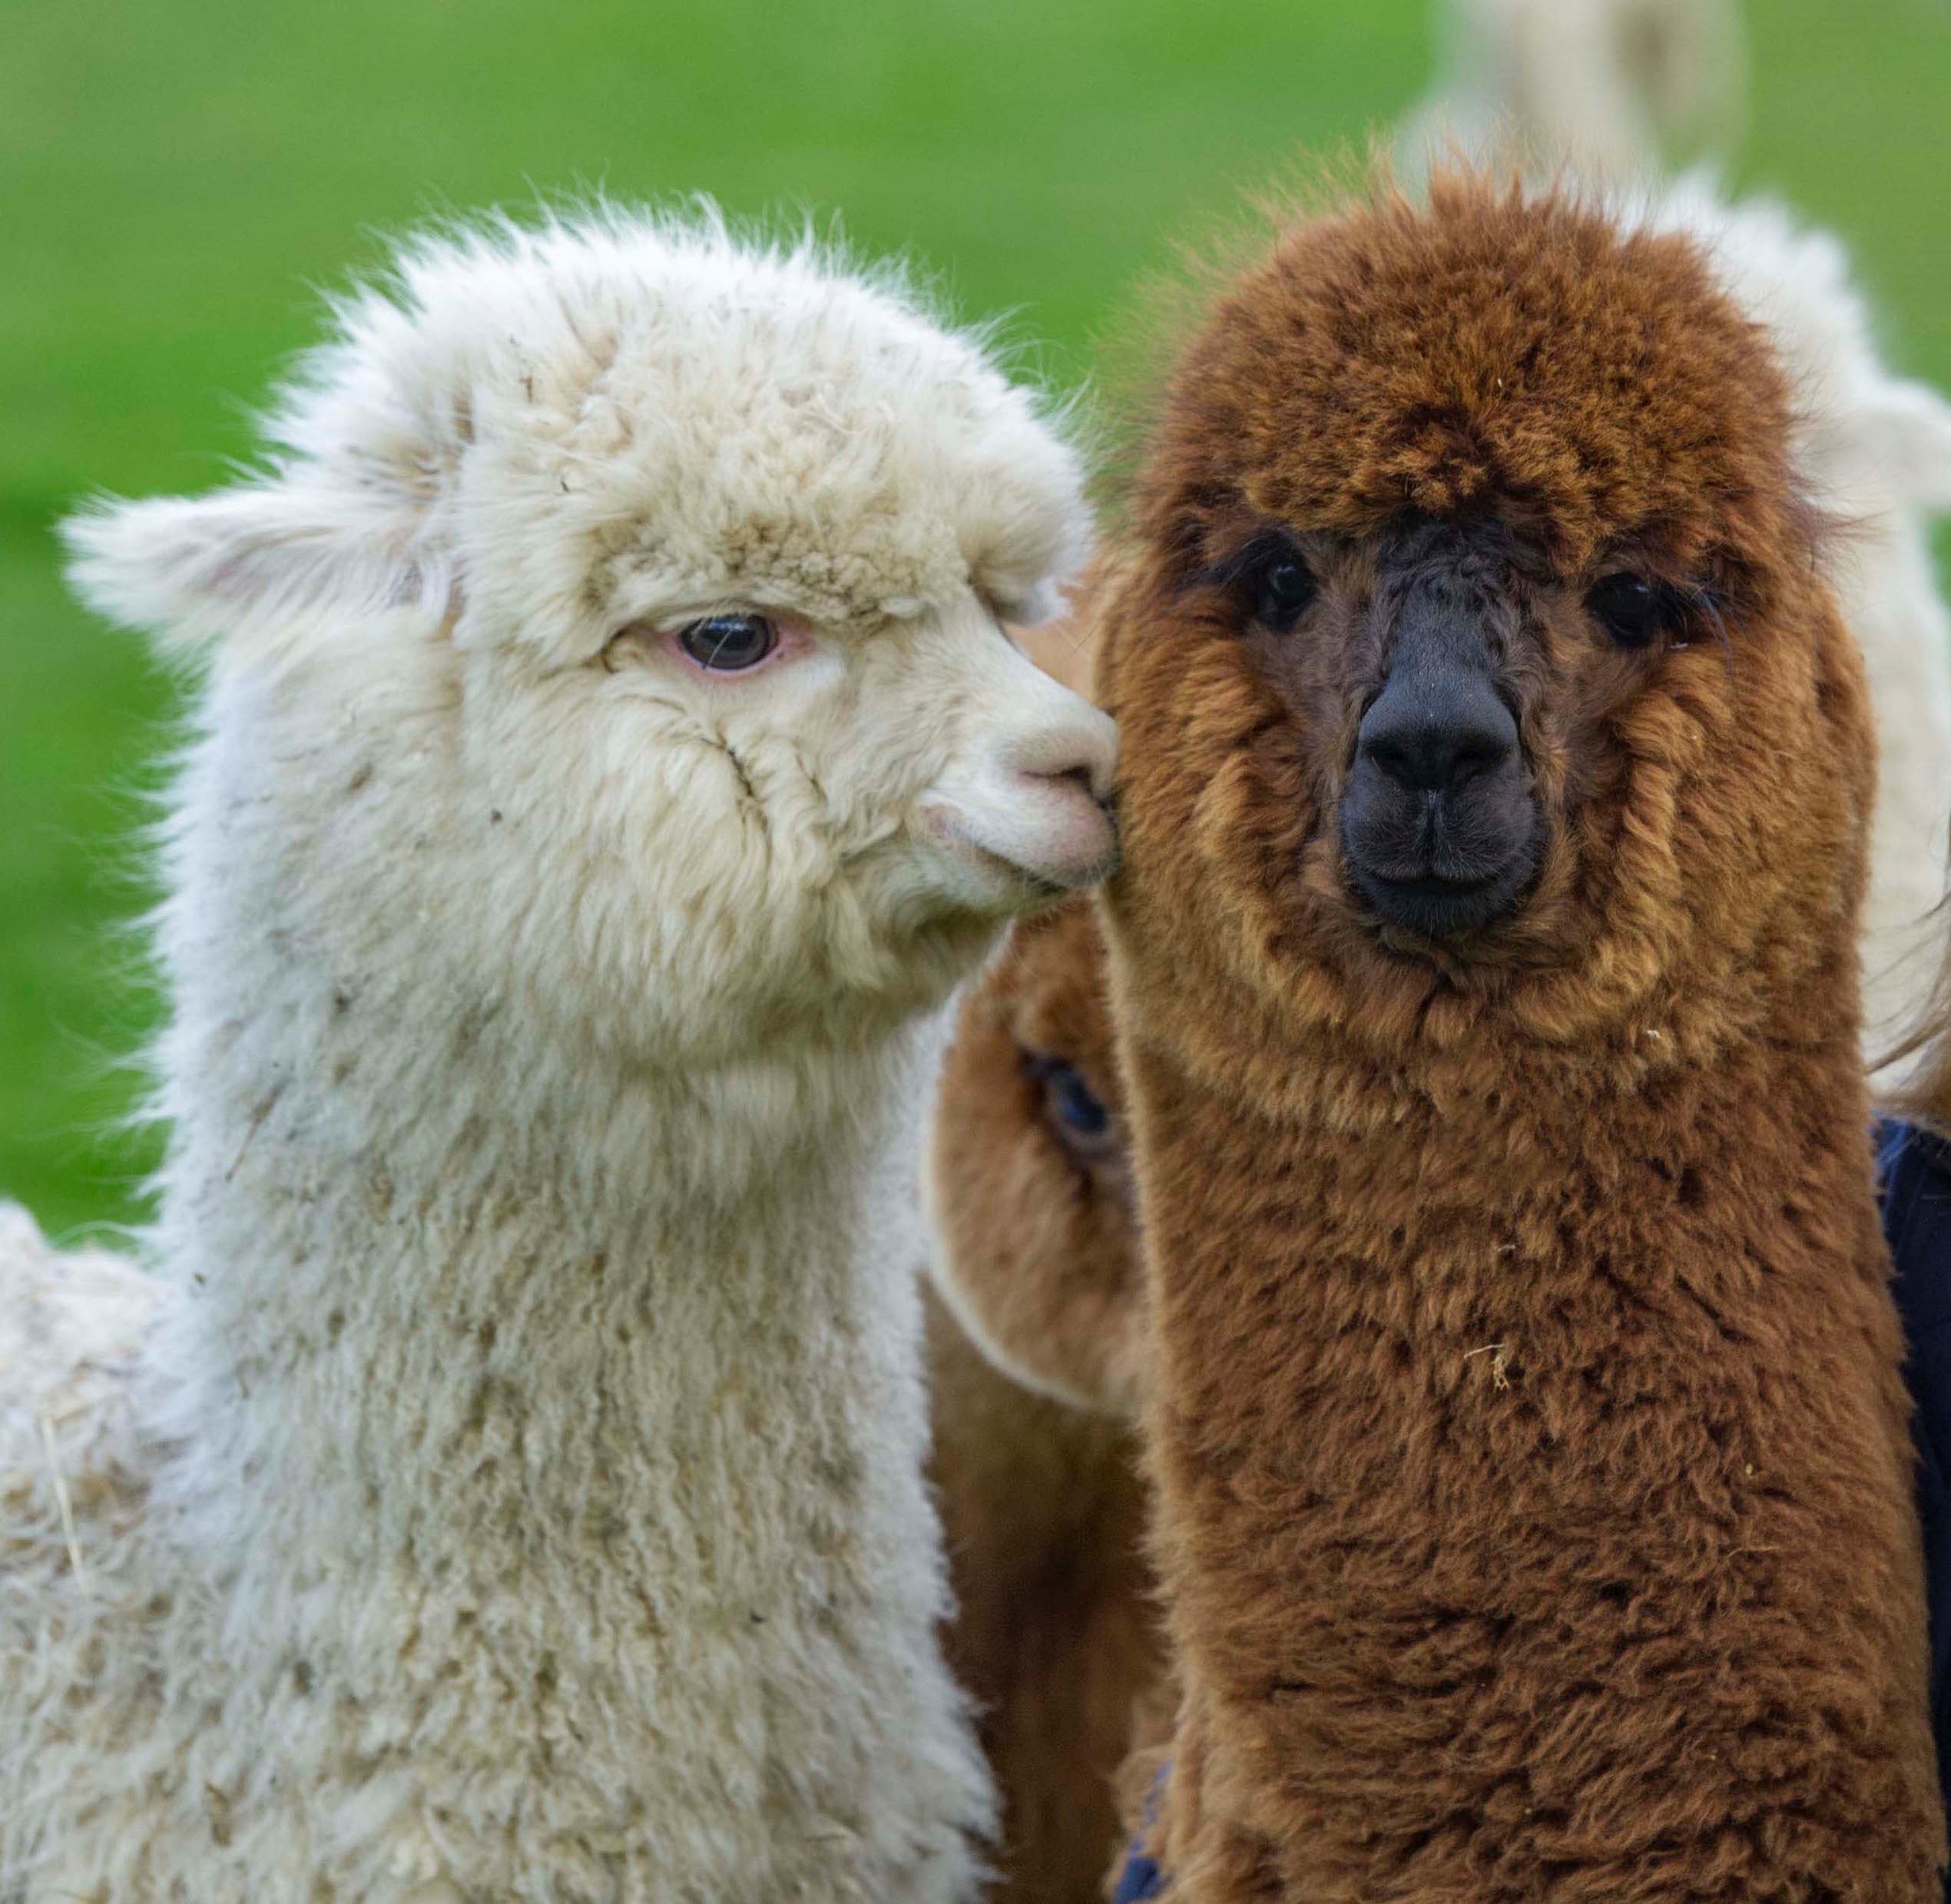 Adopt an Alpaca for a year with one Farm Visit - Beacon ...